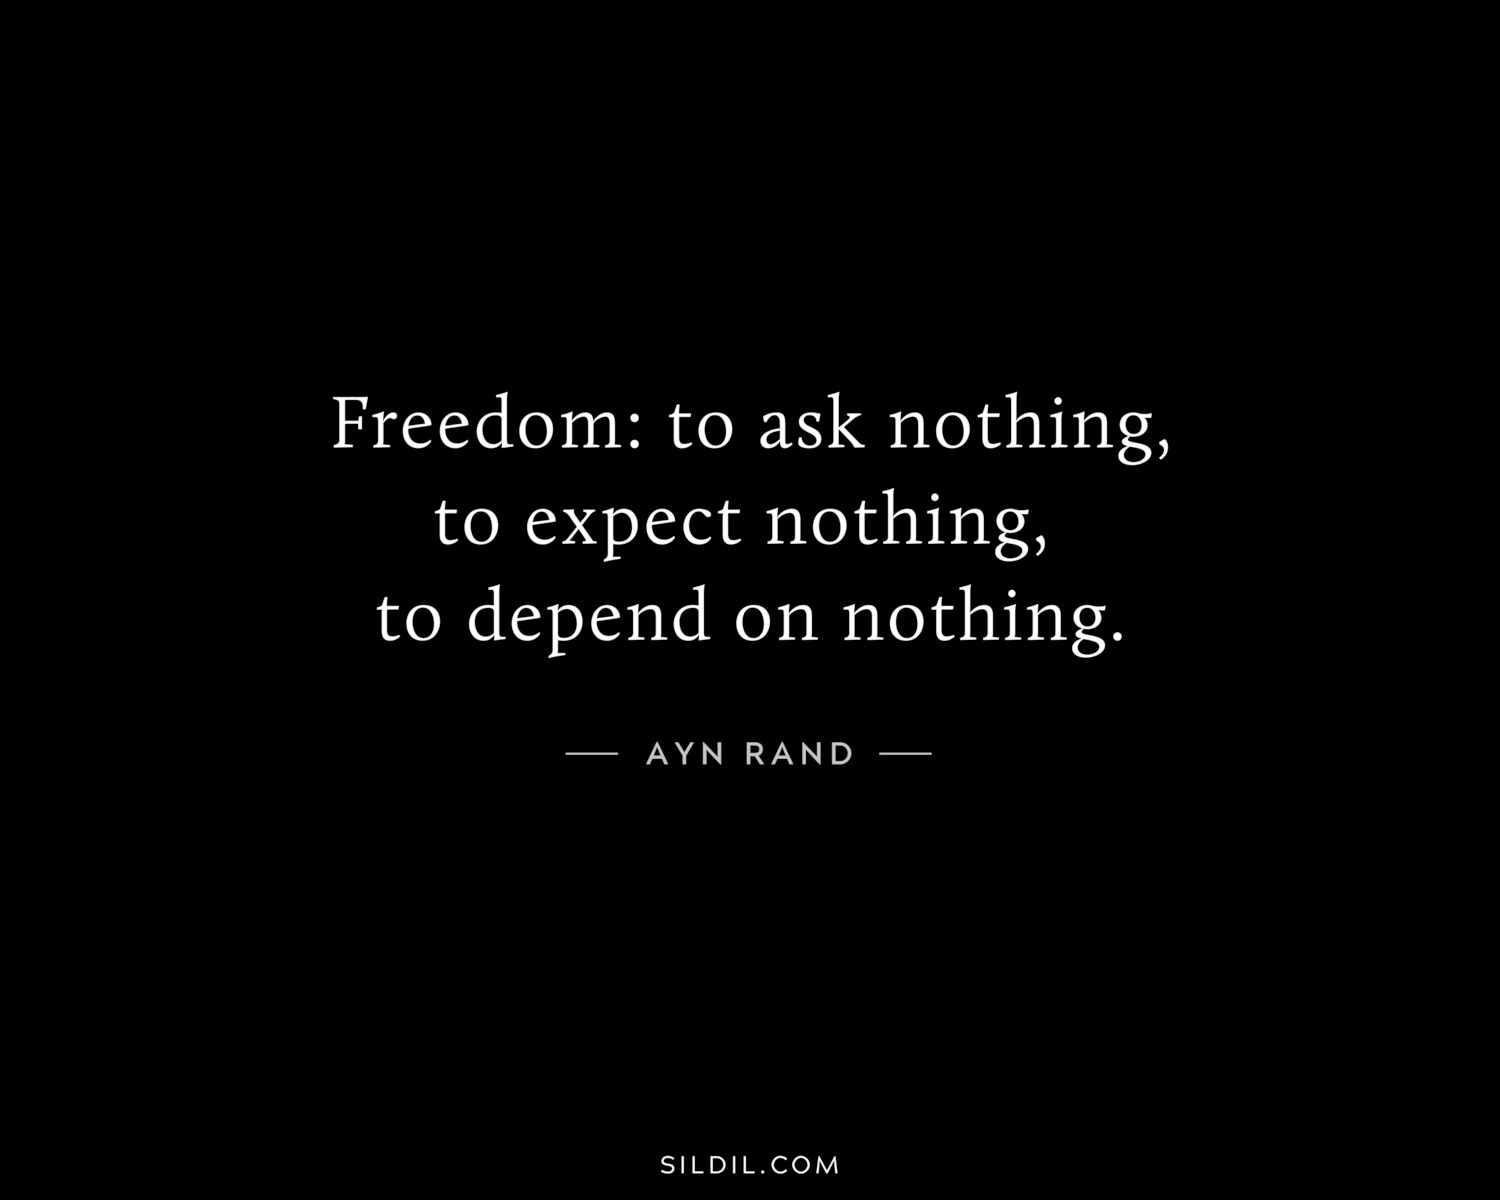 Freedom: to ask nothing, to expect nothing, to depend on nothing.